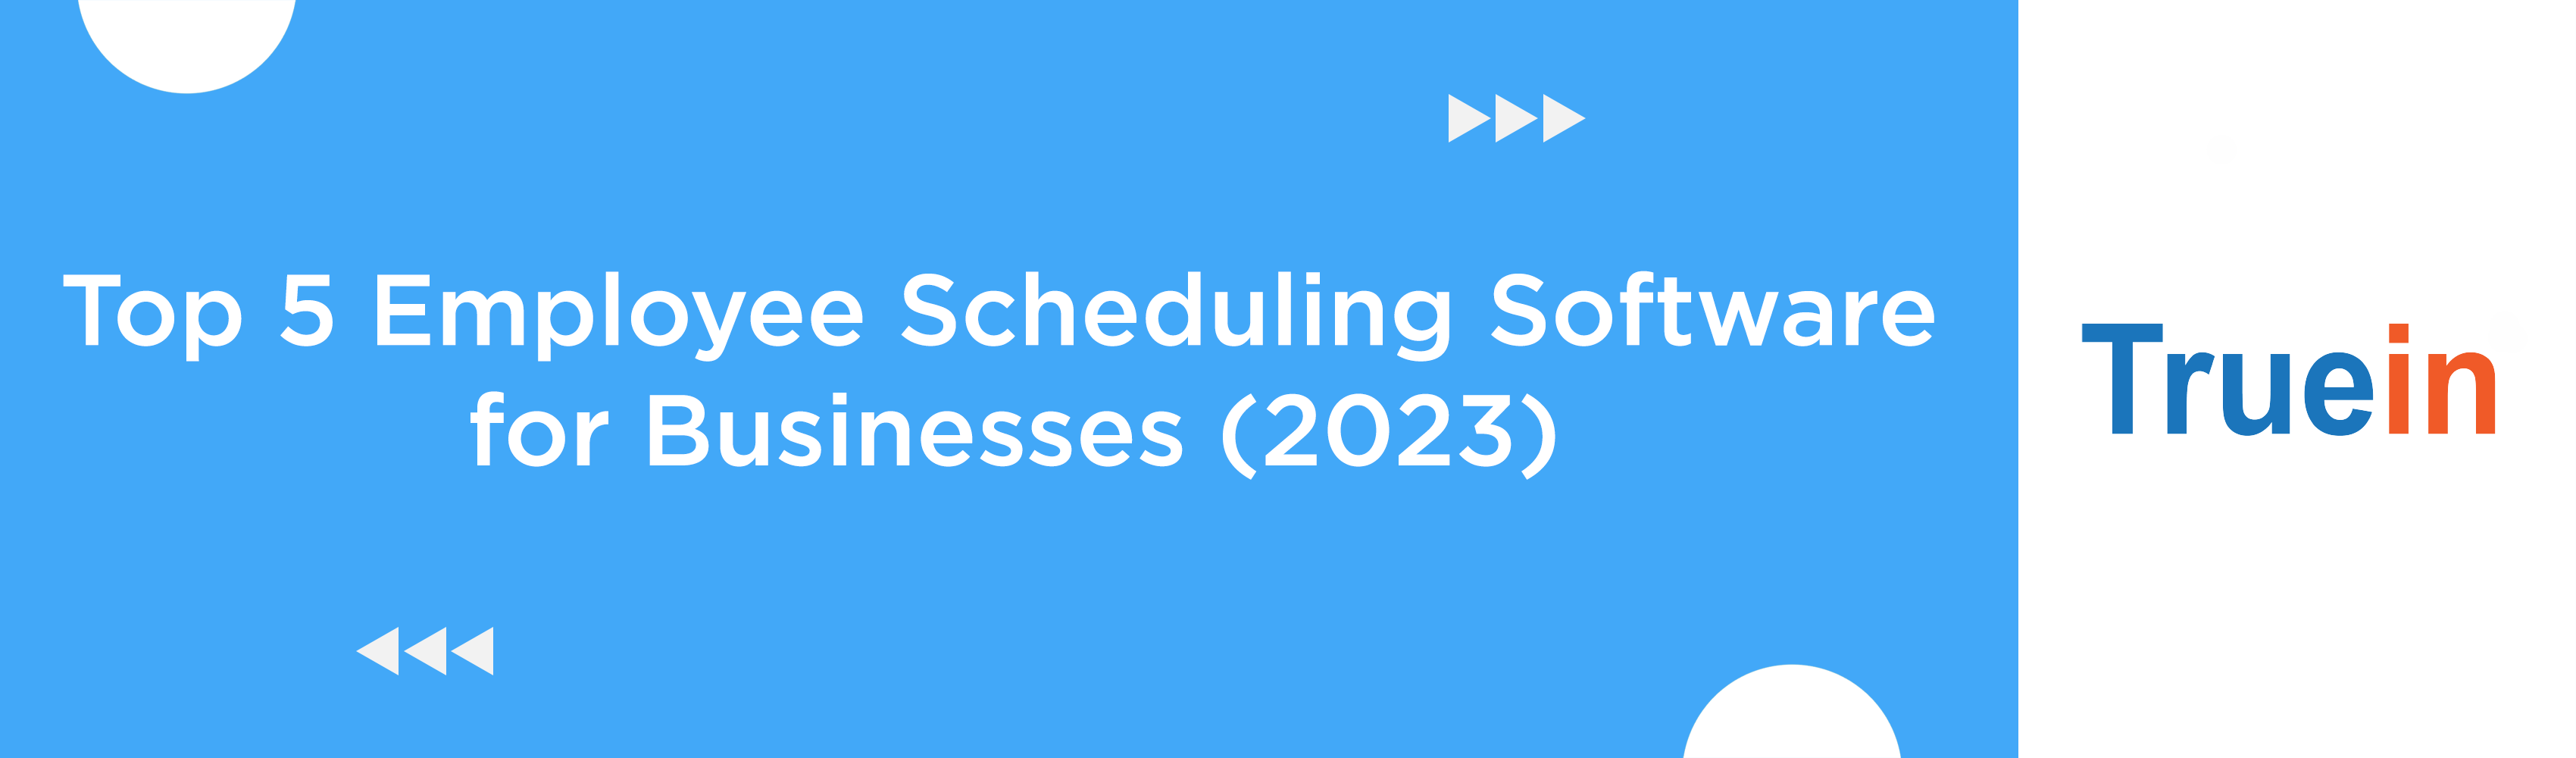 Top 5 Employee Scheduling Software for Businesses (2023)